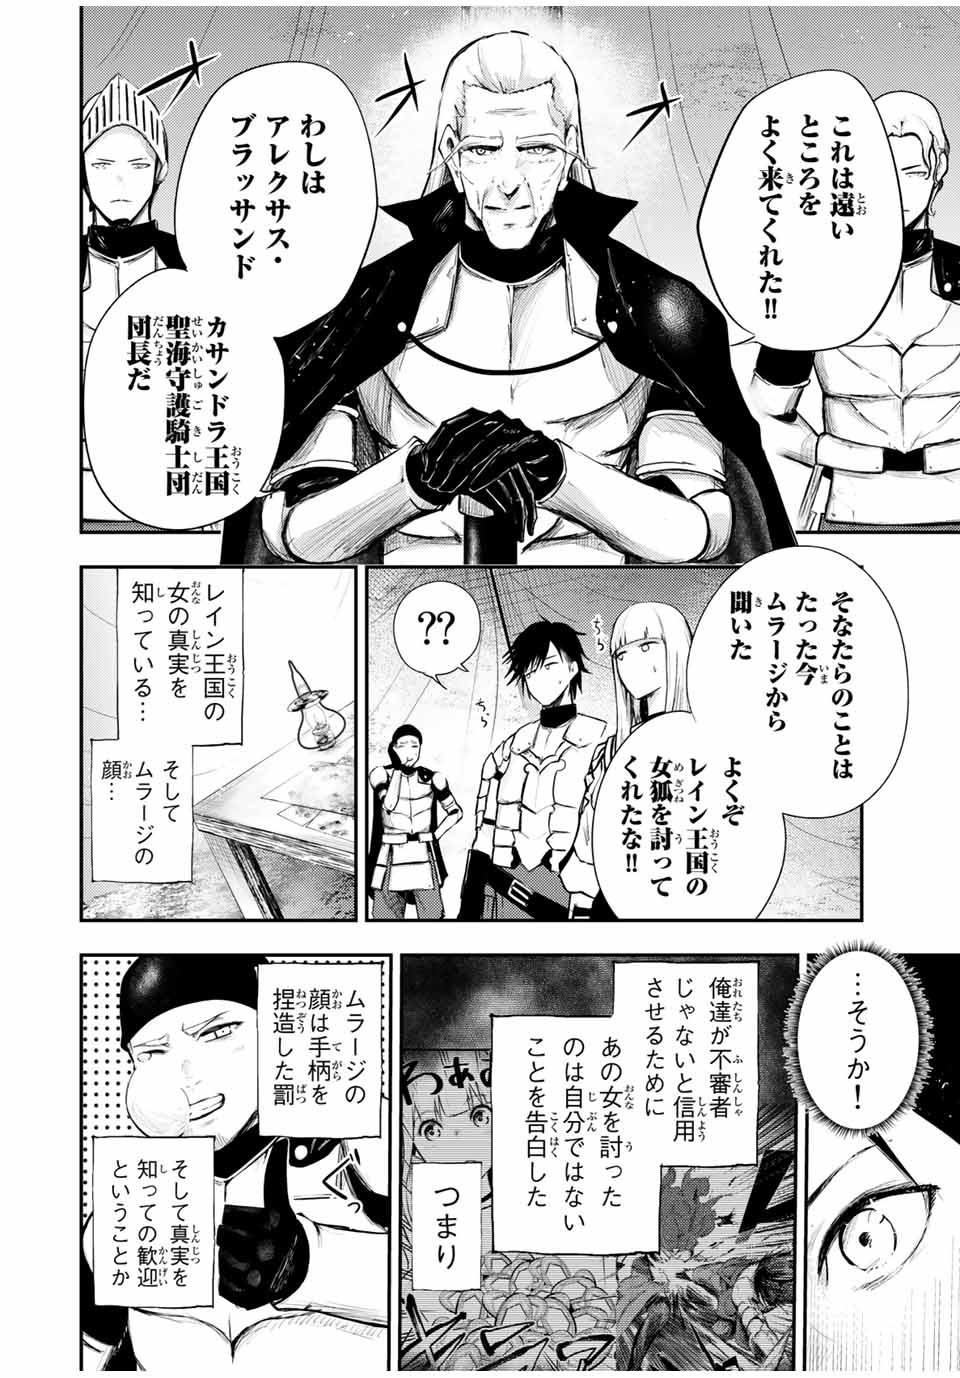 the strongest former prince-; 奴隷転生 ～その奴隷、最強の元王子につき～ 第27話 - Page 18